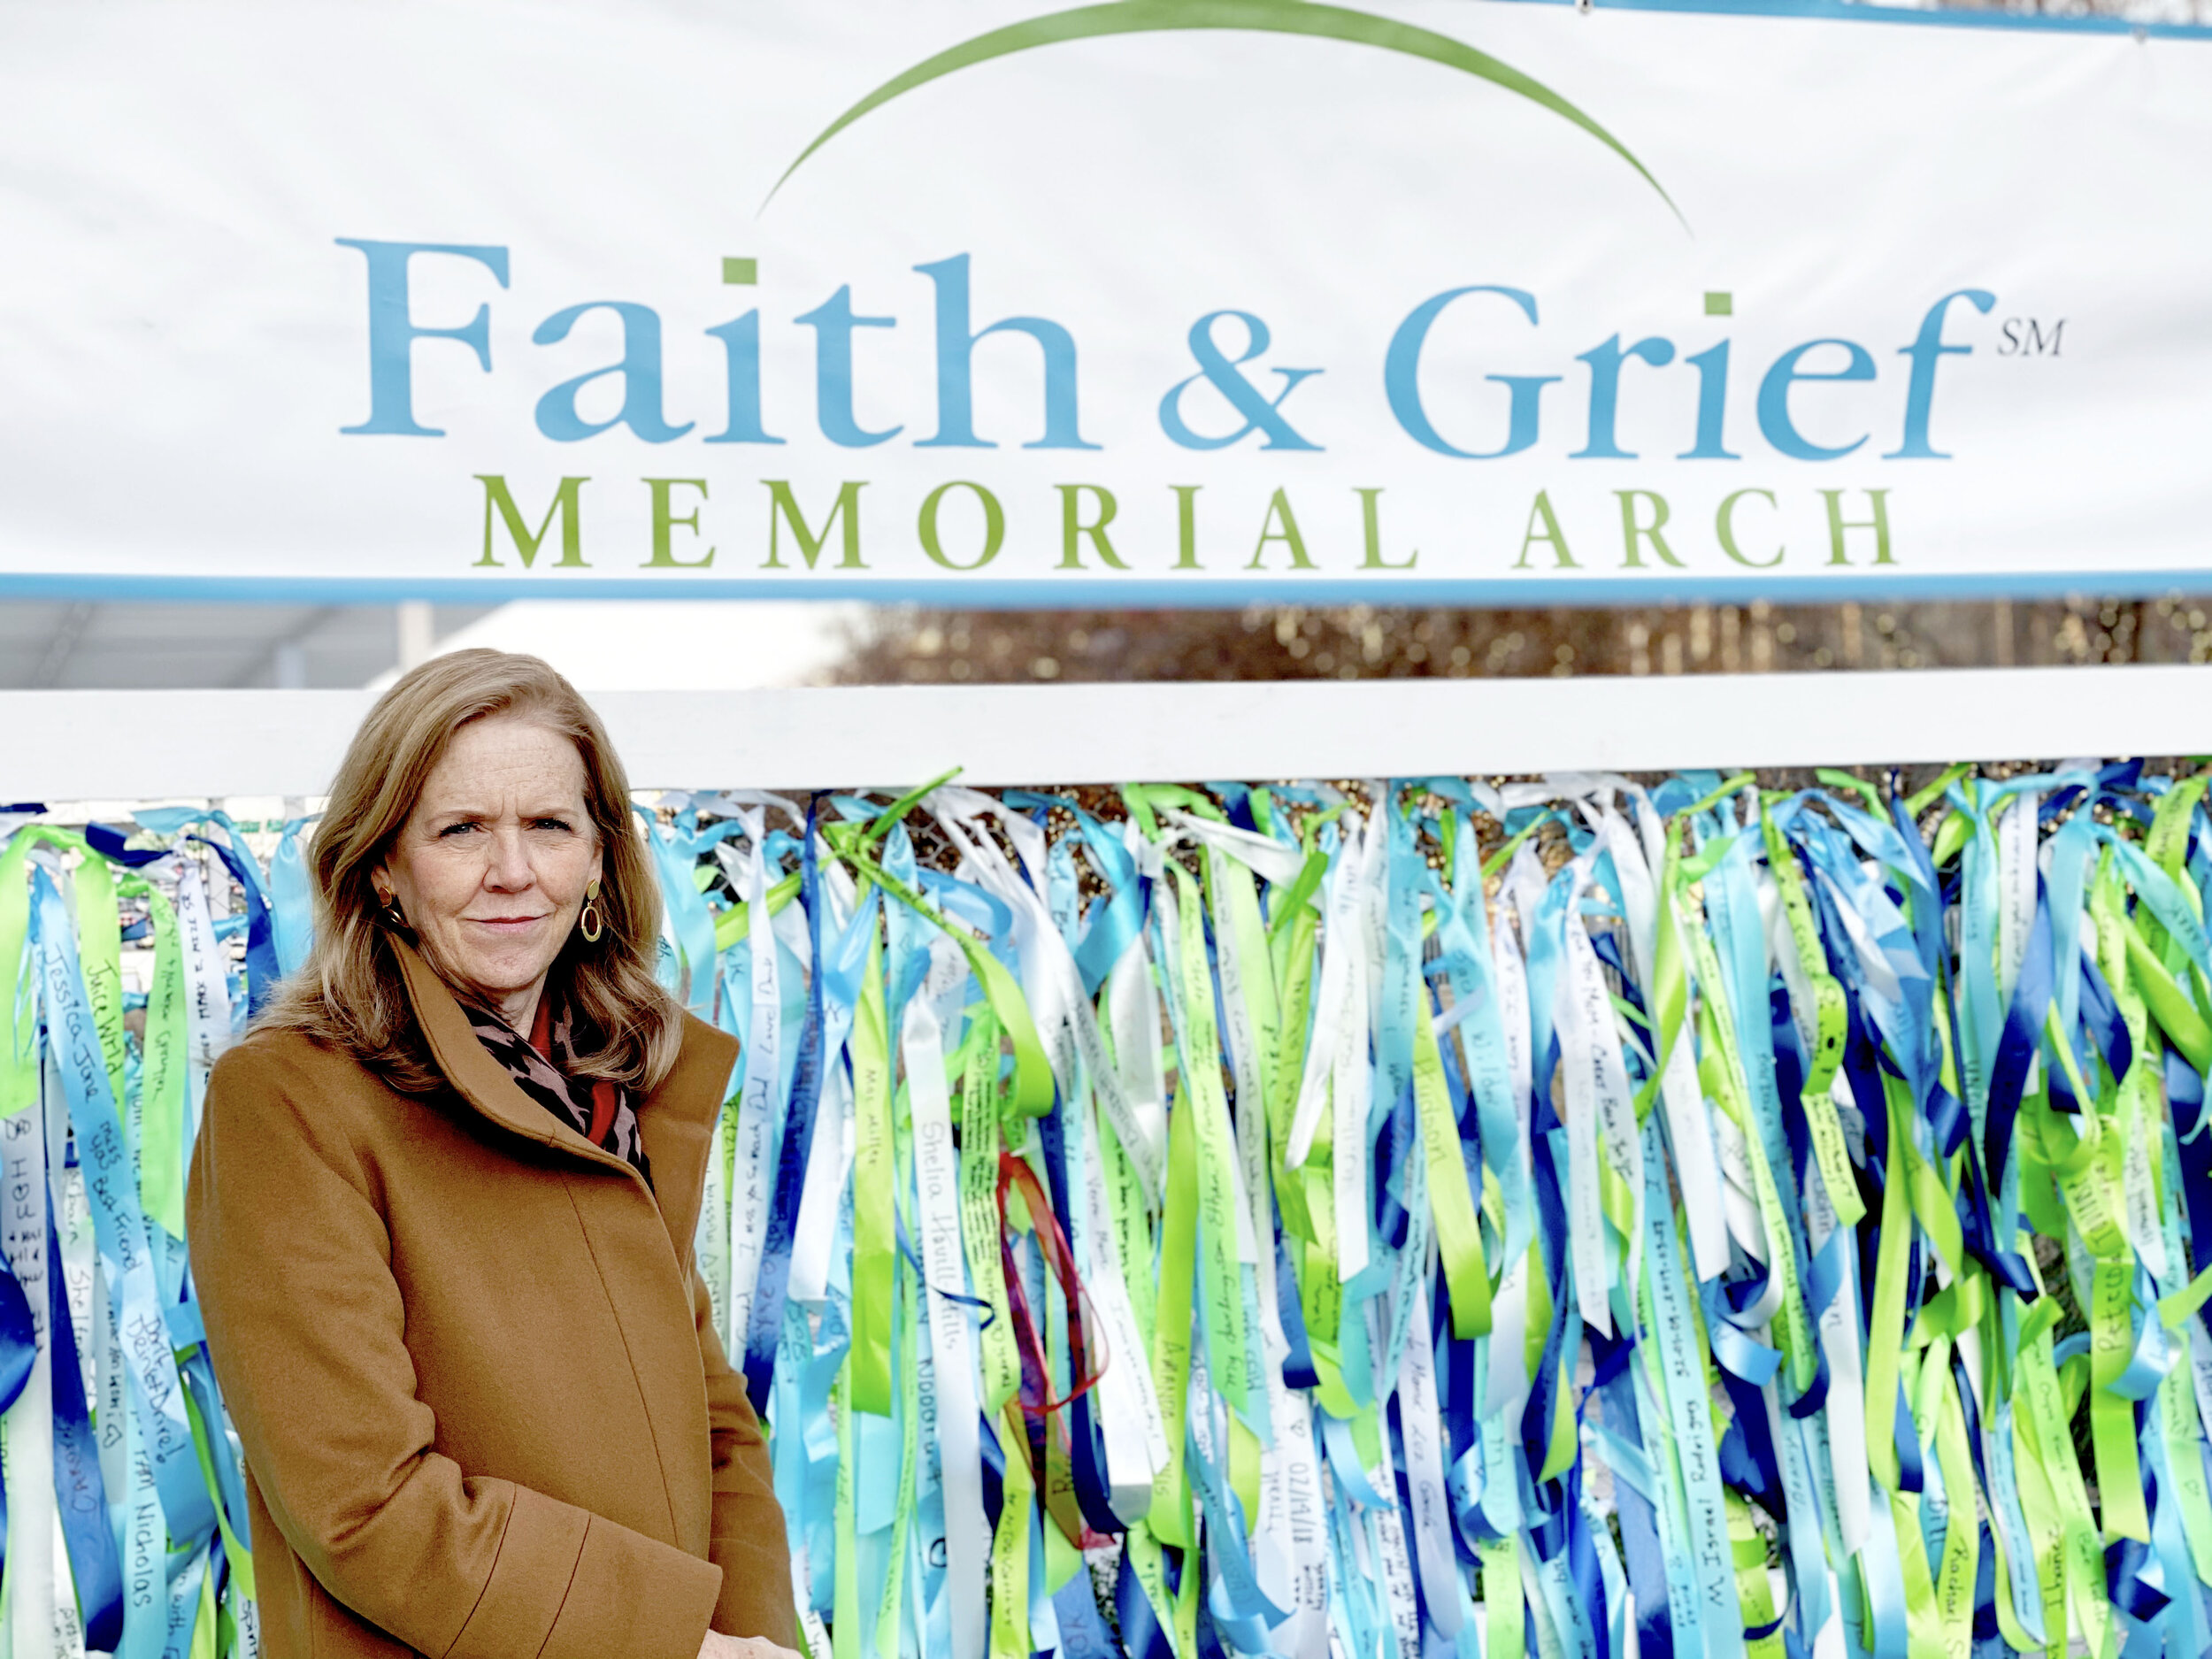 Sharon Balch, co-founder of Faith and Grief Ministries